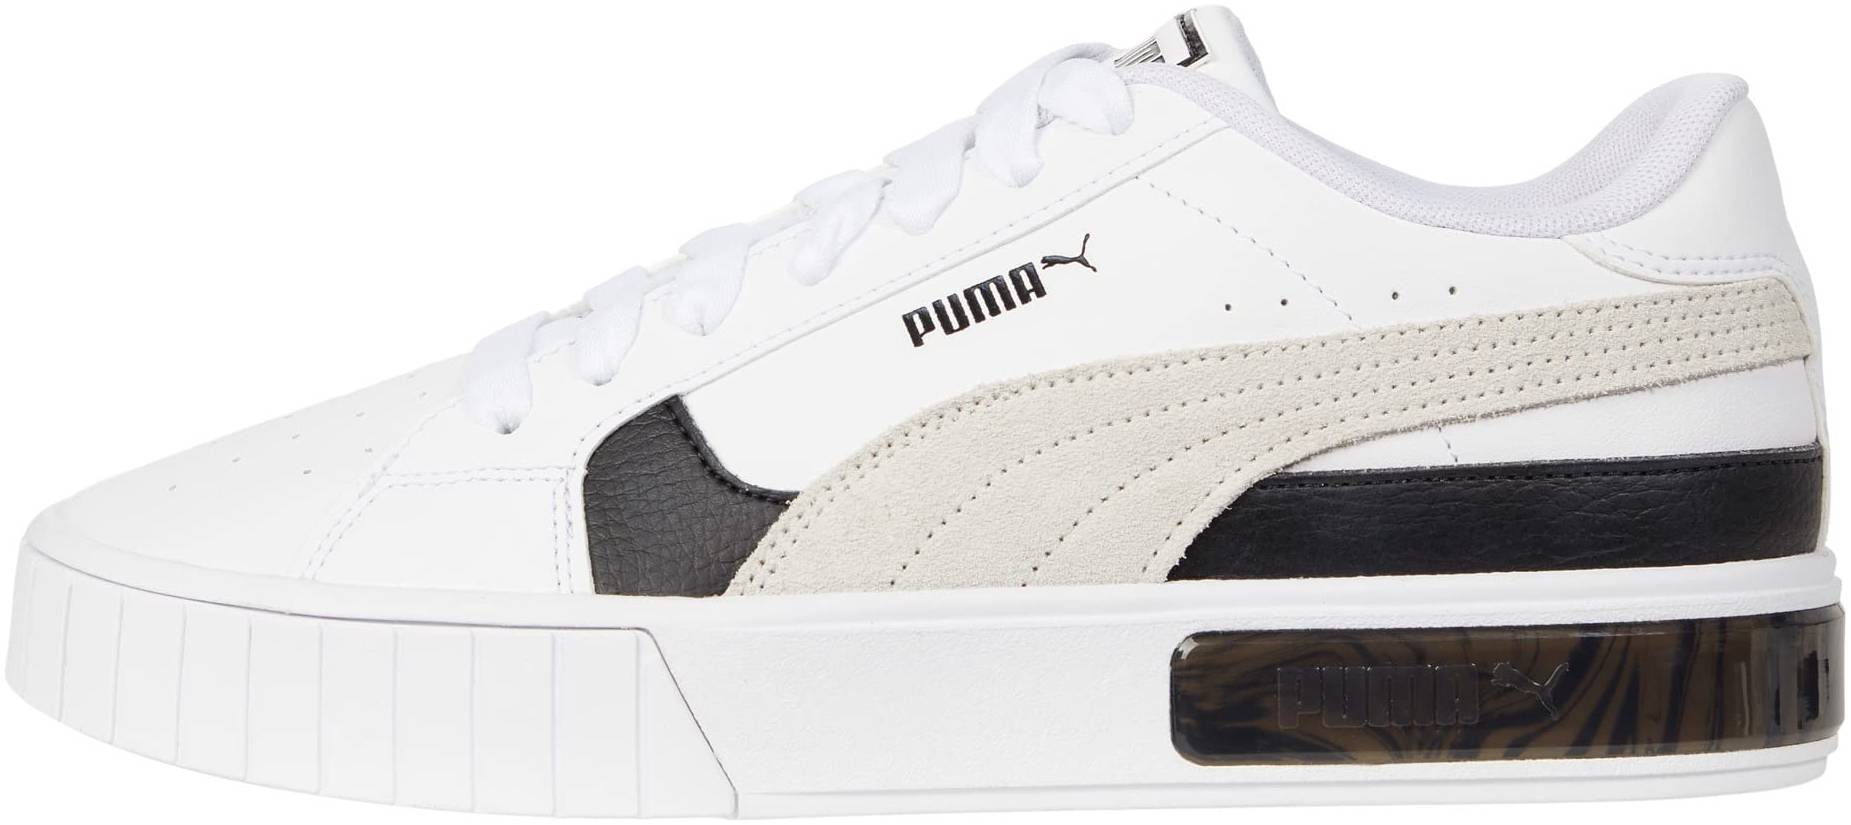 Lost Ass solely Puma Cali Star sneakers in white (only $40) | RunRepeat